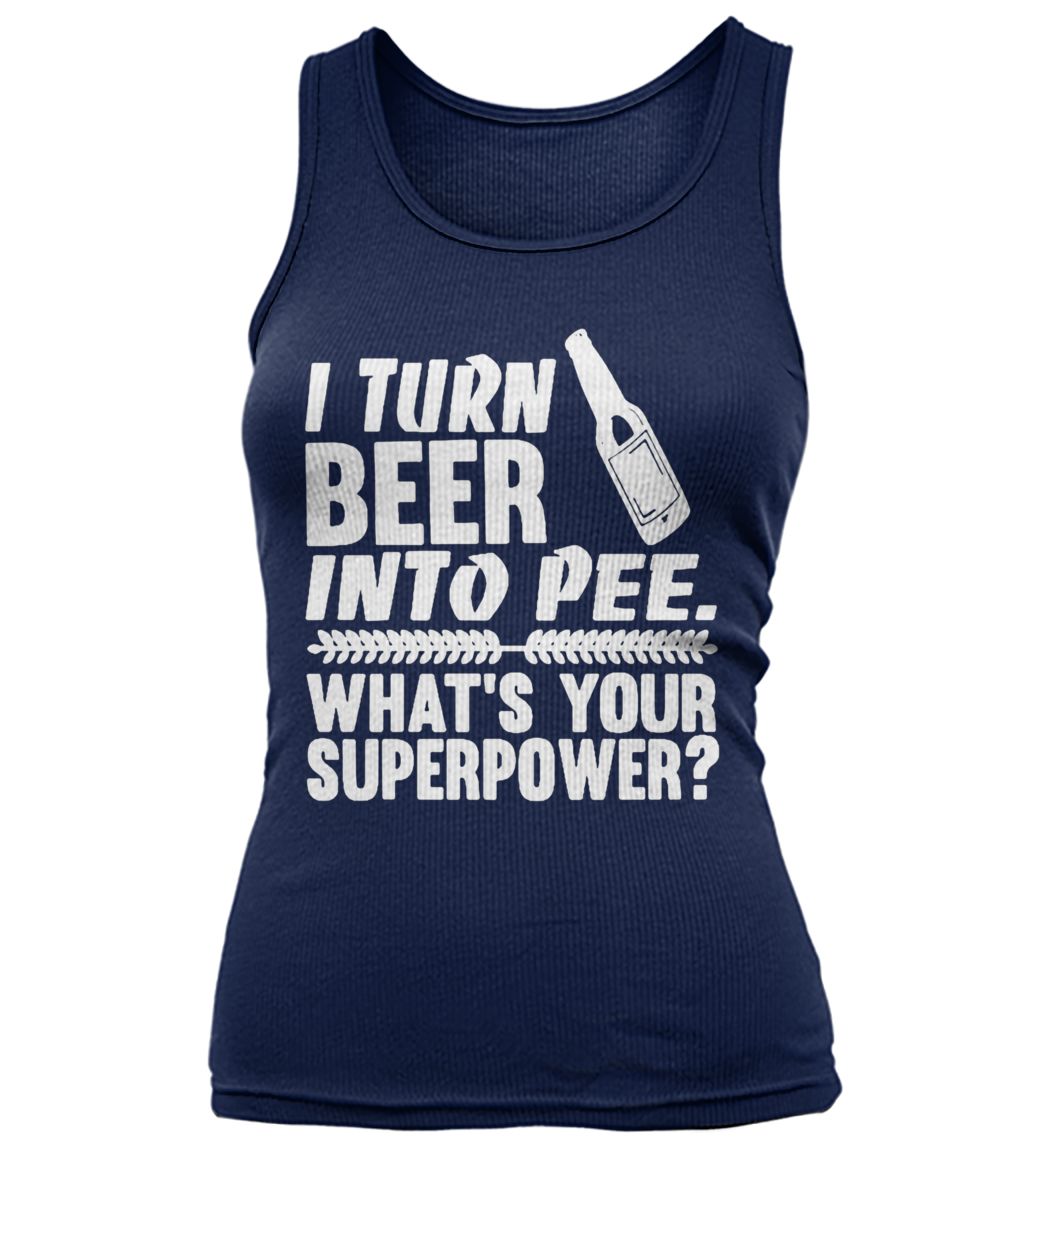 I turn beer into pee what's your supperpower women's tank top